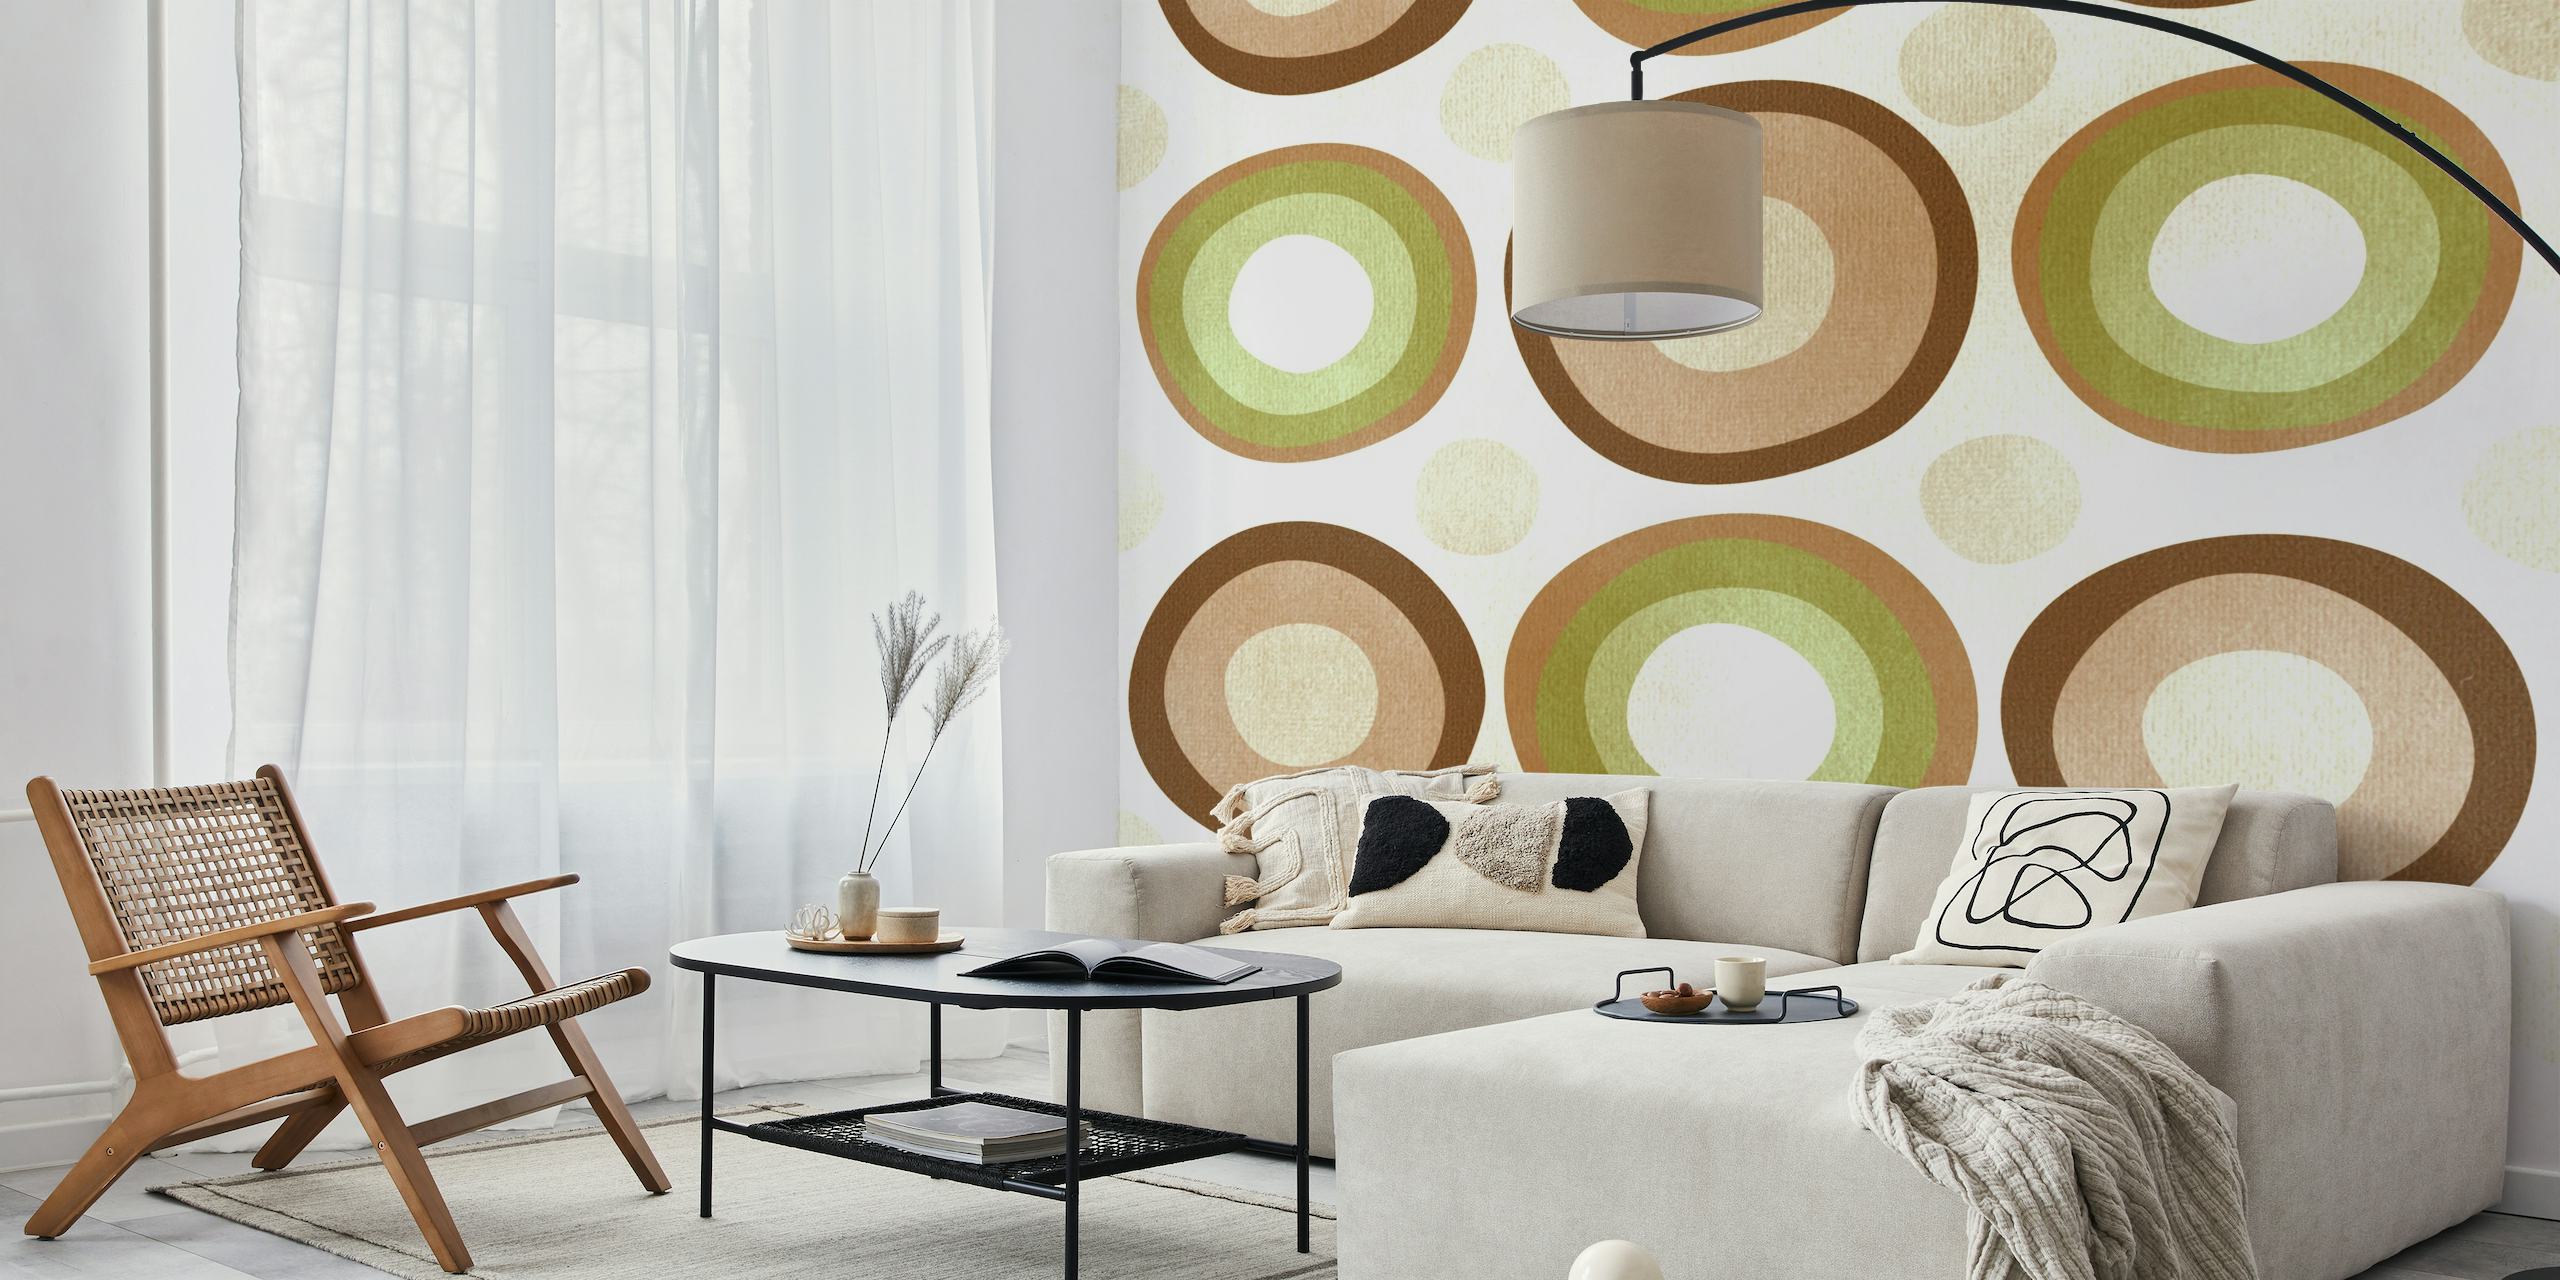 Happy Midcentury Modern Geo wall mural with geometric circles in muted brown and green colors